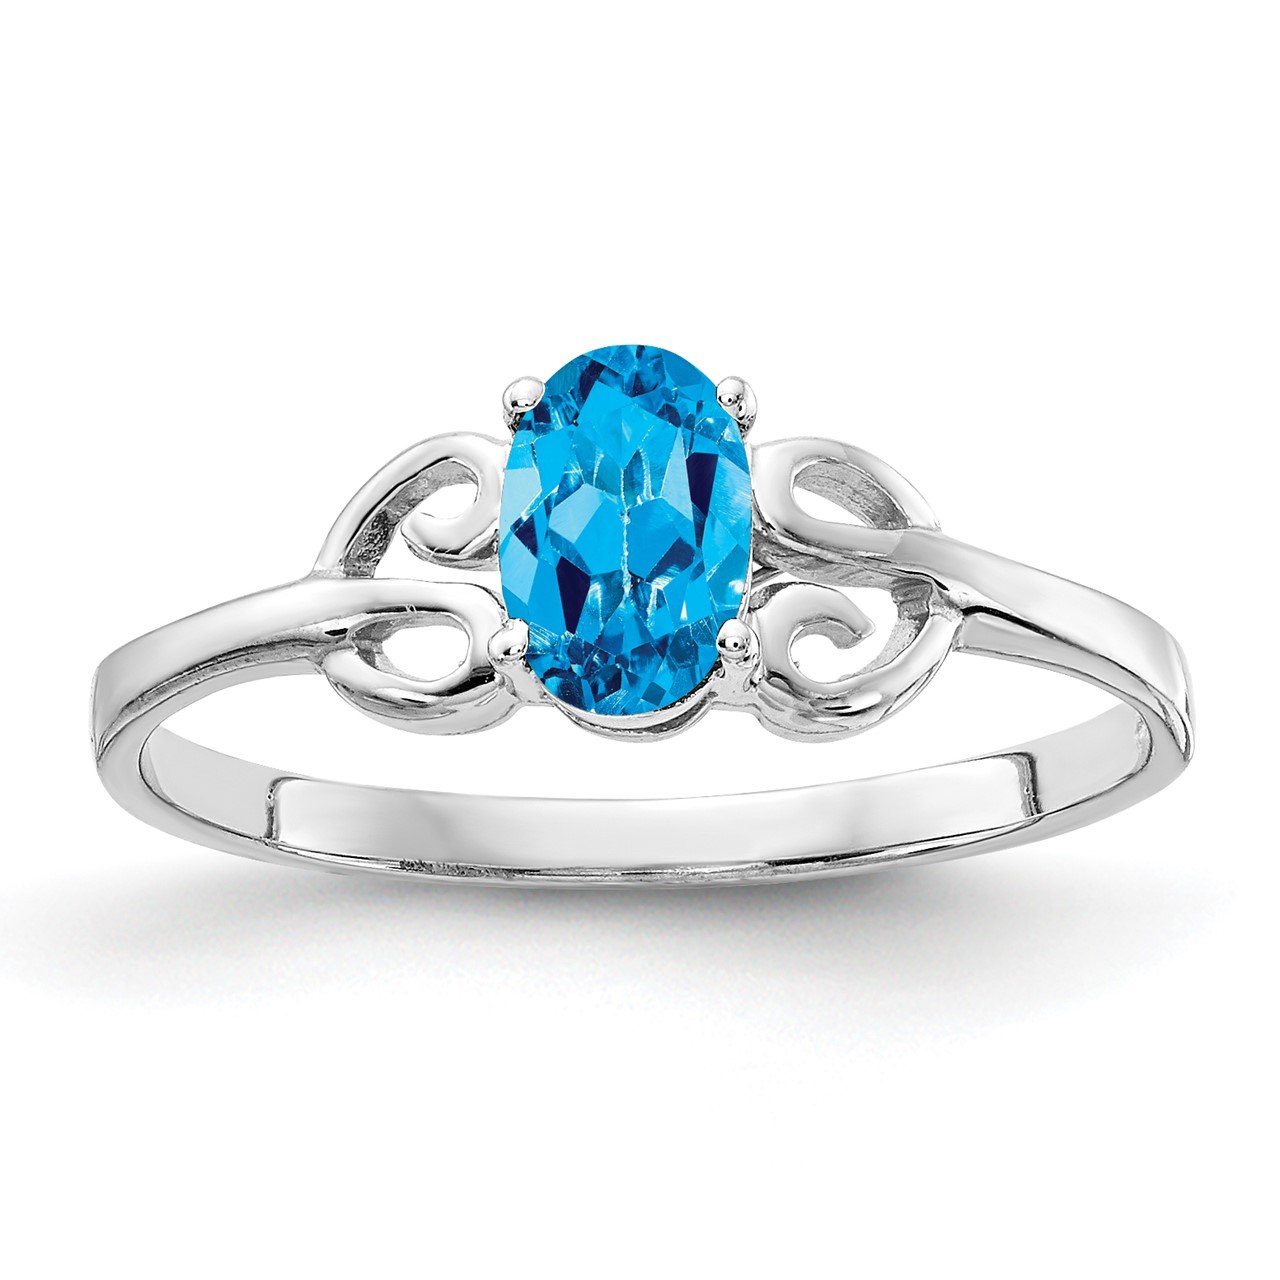 14k White Gold 6x4mm Oval Blue Topaz ring | The Gold Store